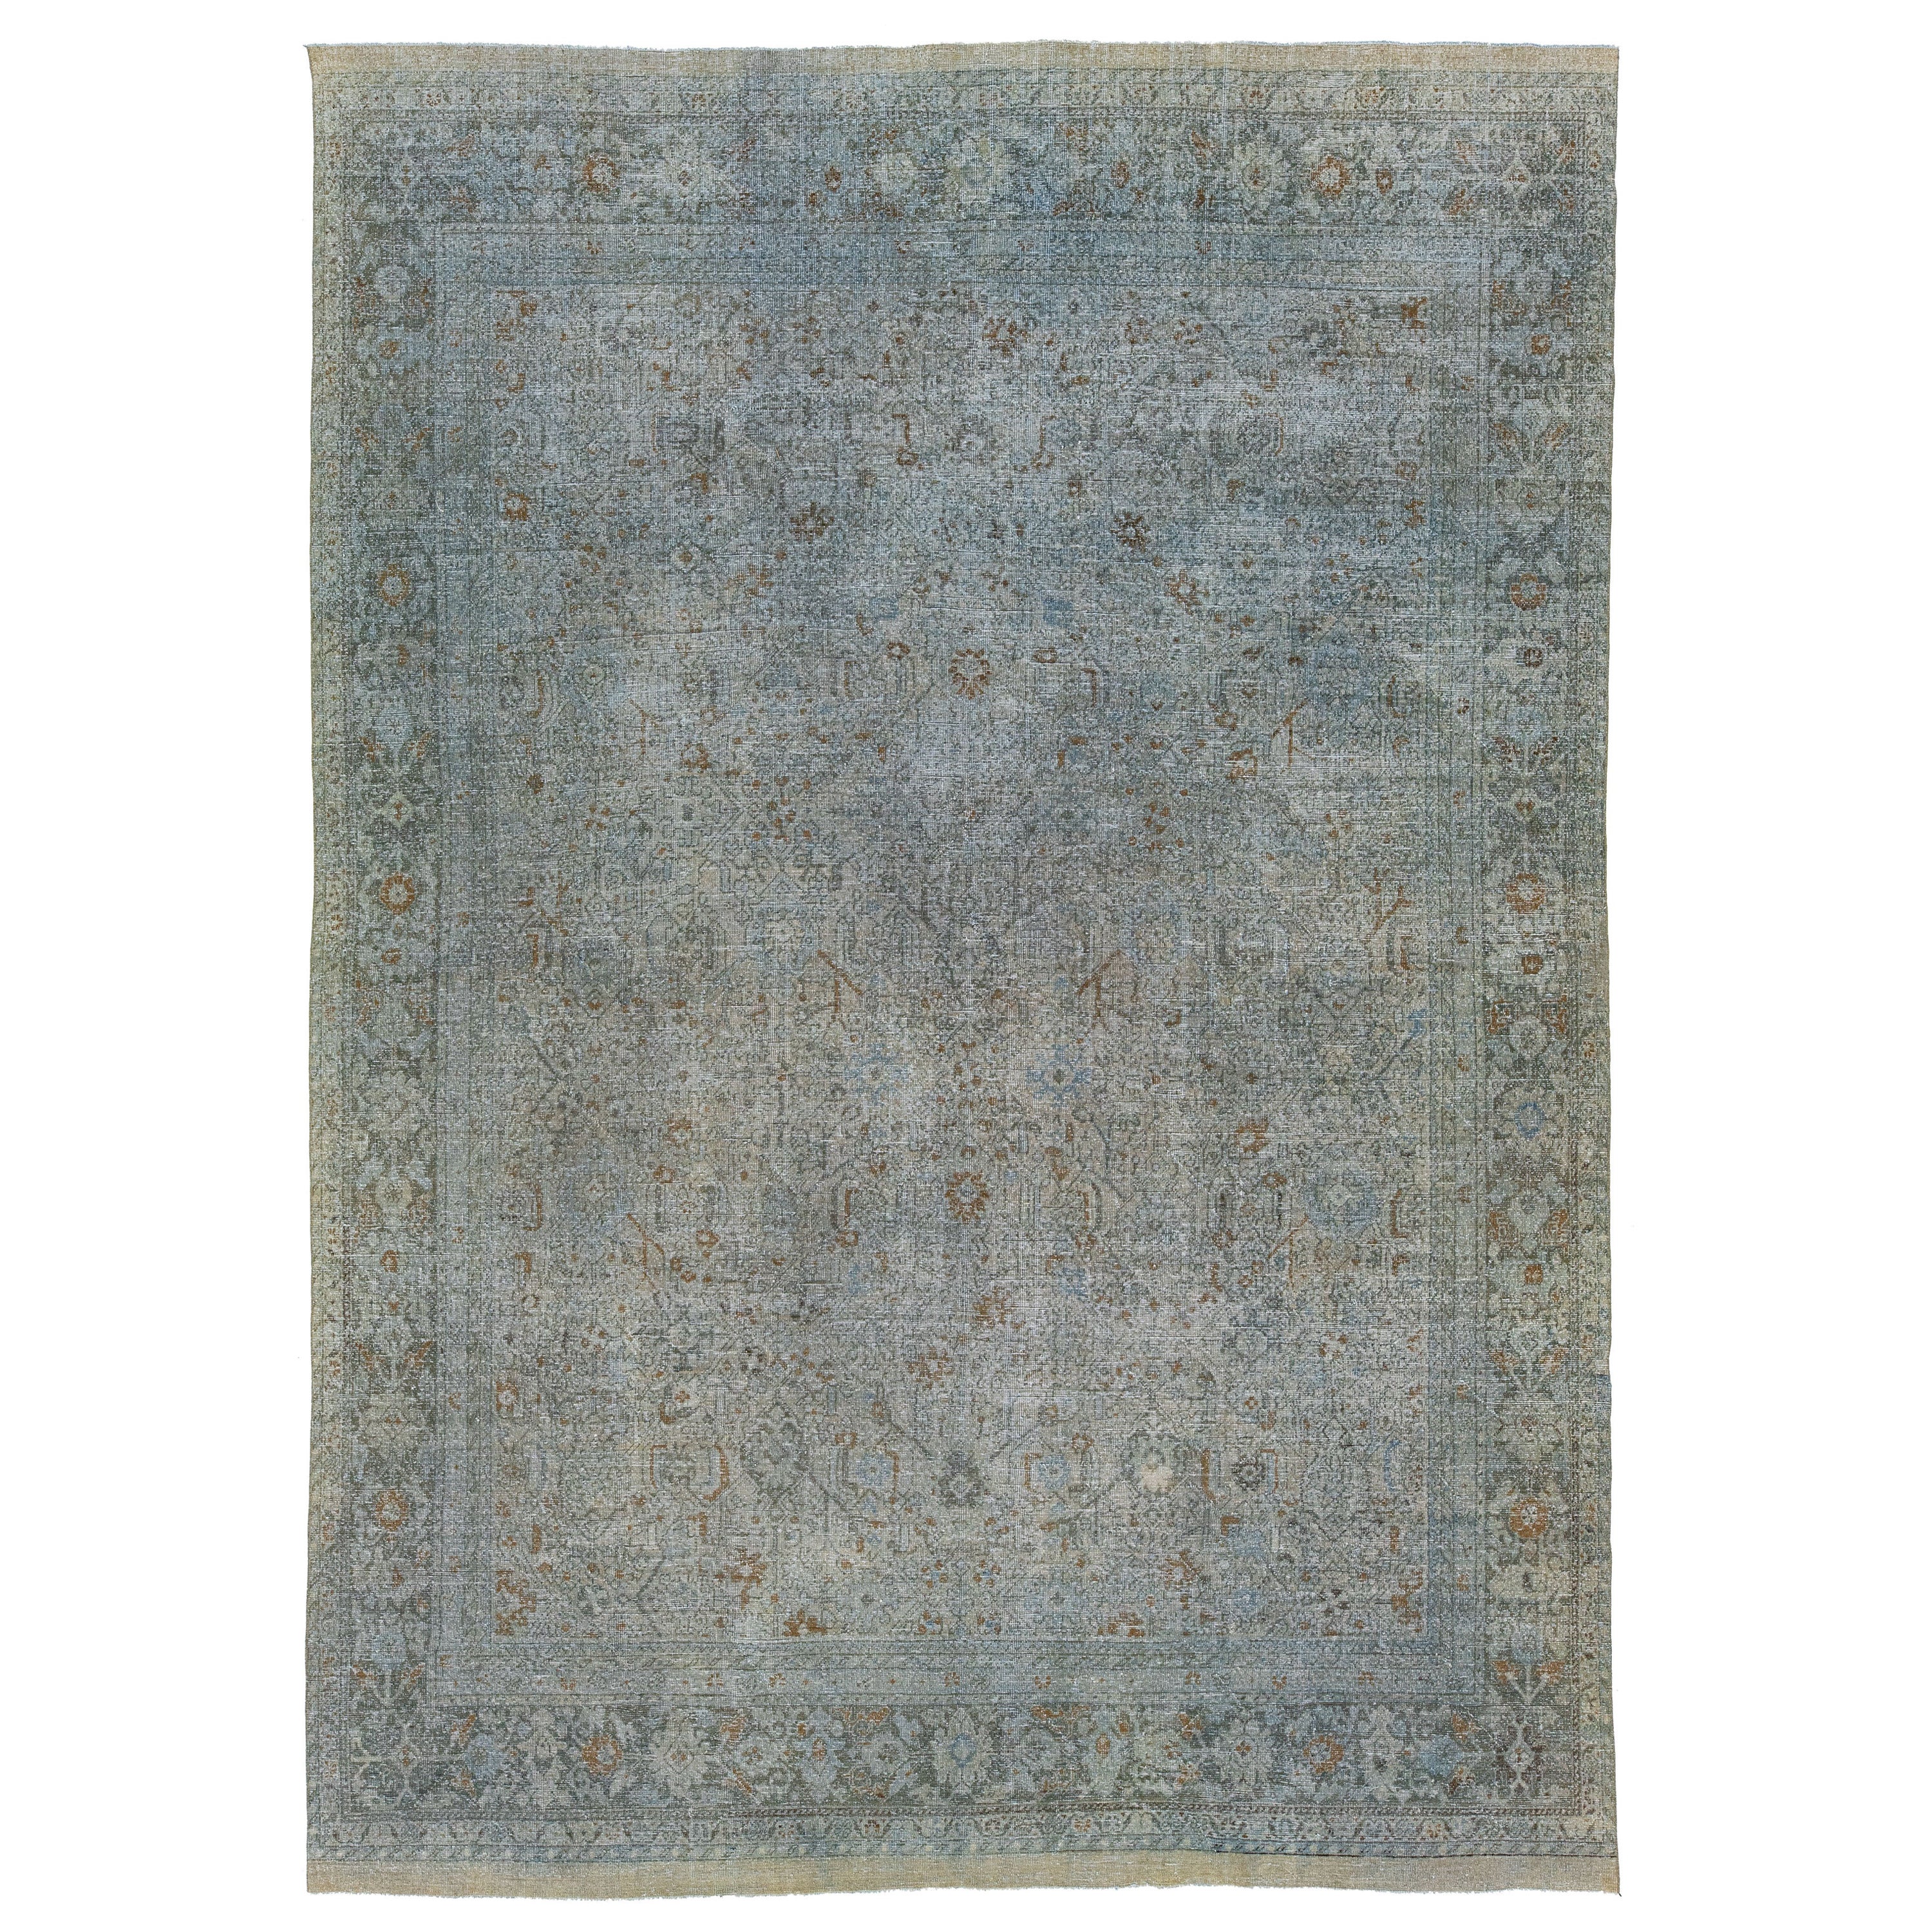 19th Century Antique Persian Tabriz Wool Rug with Allover Design In Gray For Sale